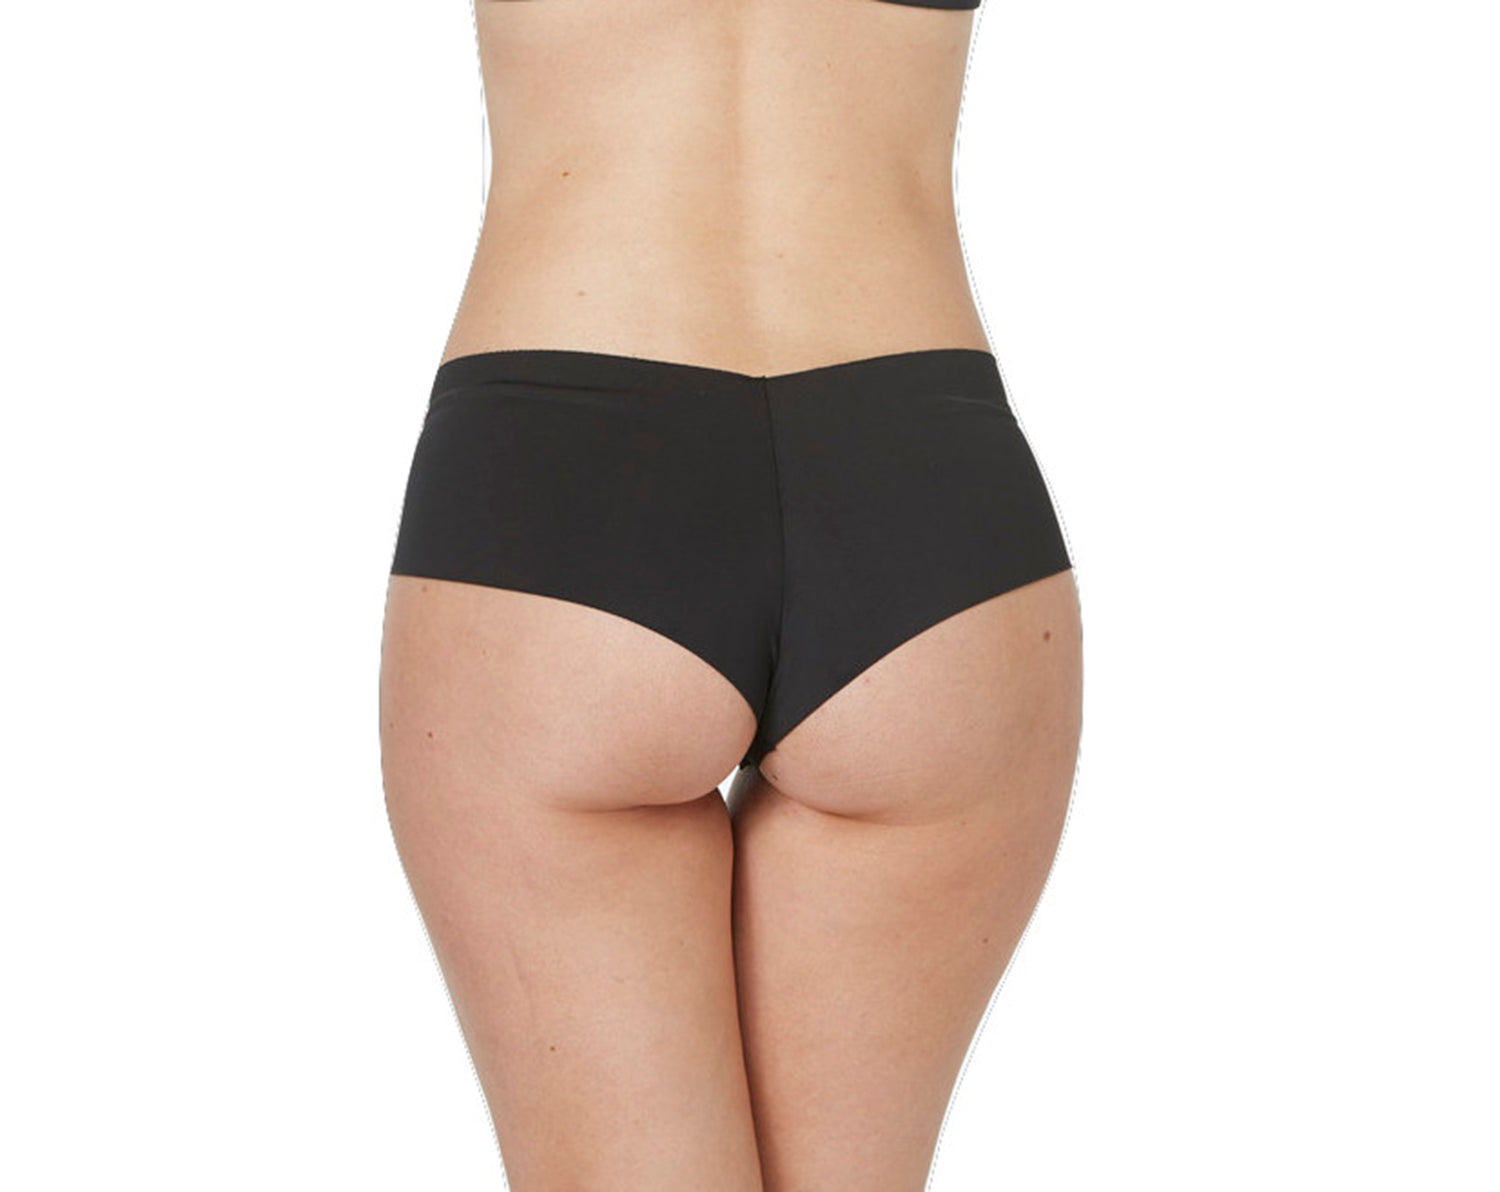 Alessandra B Camel Toe Cover Brief M7712 Nude or Black ( Small - Med/Large  )